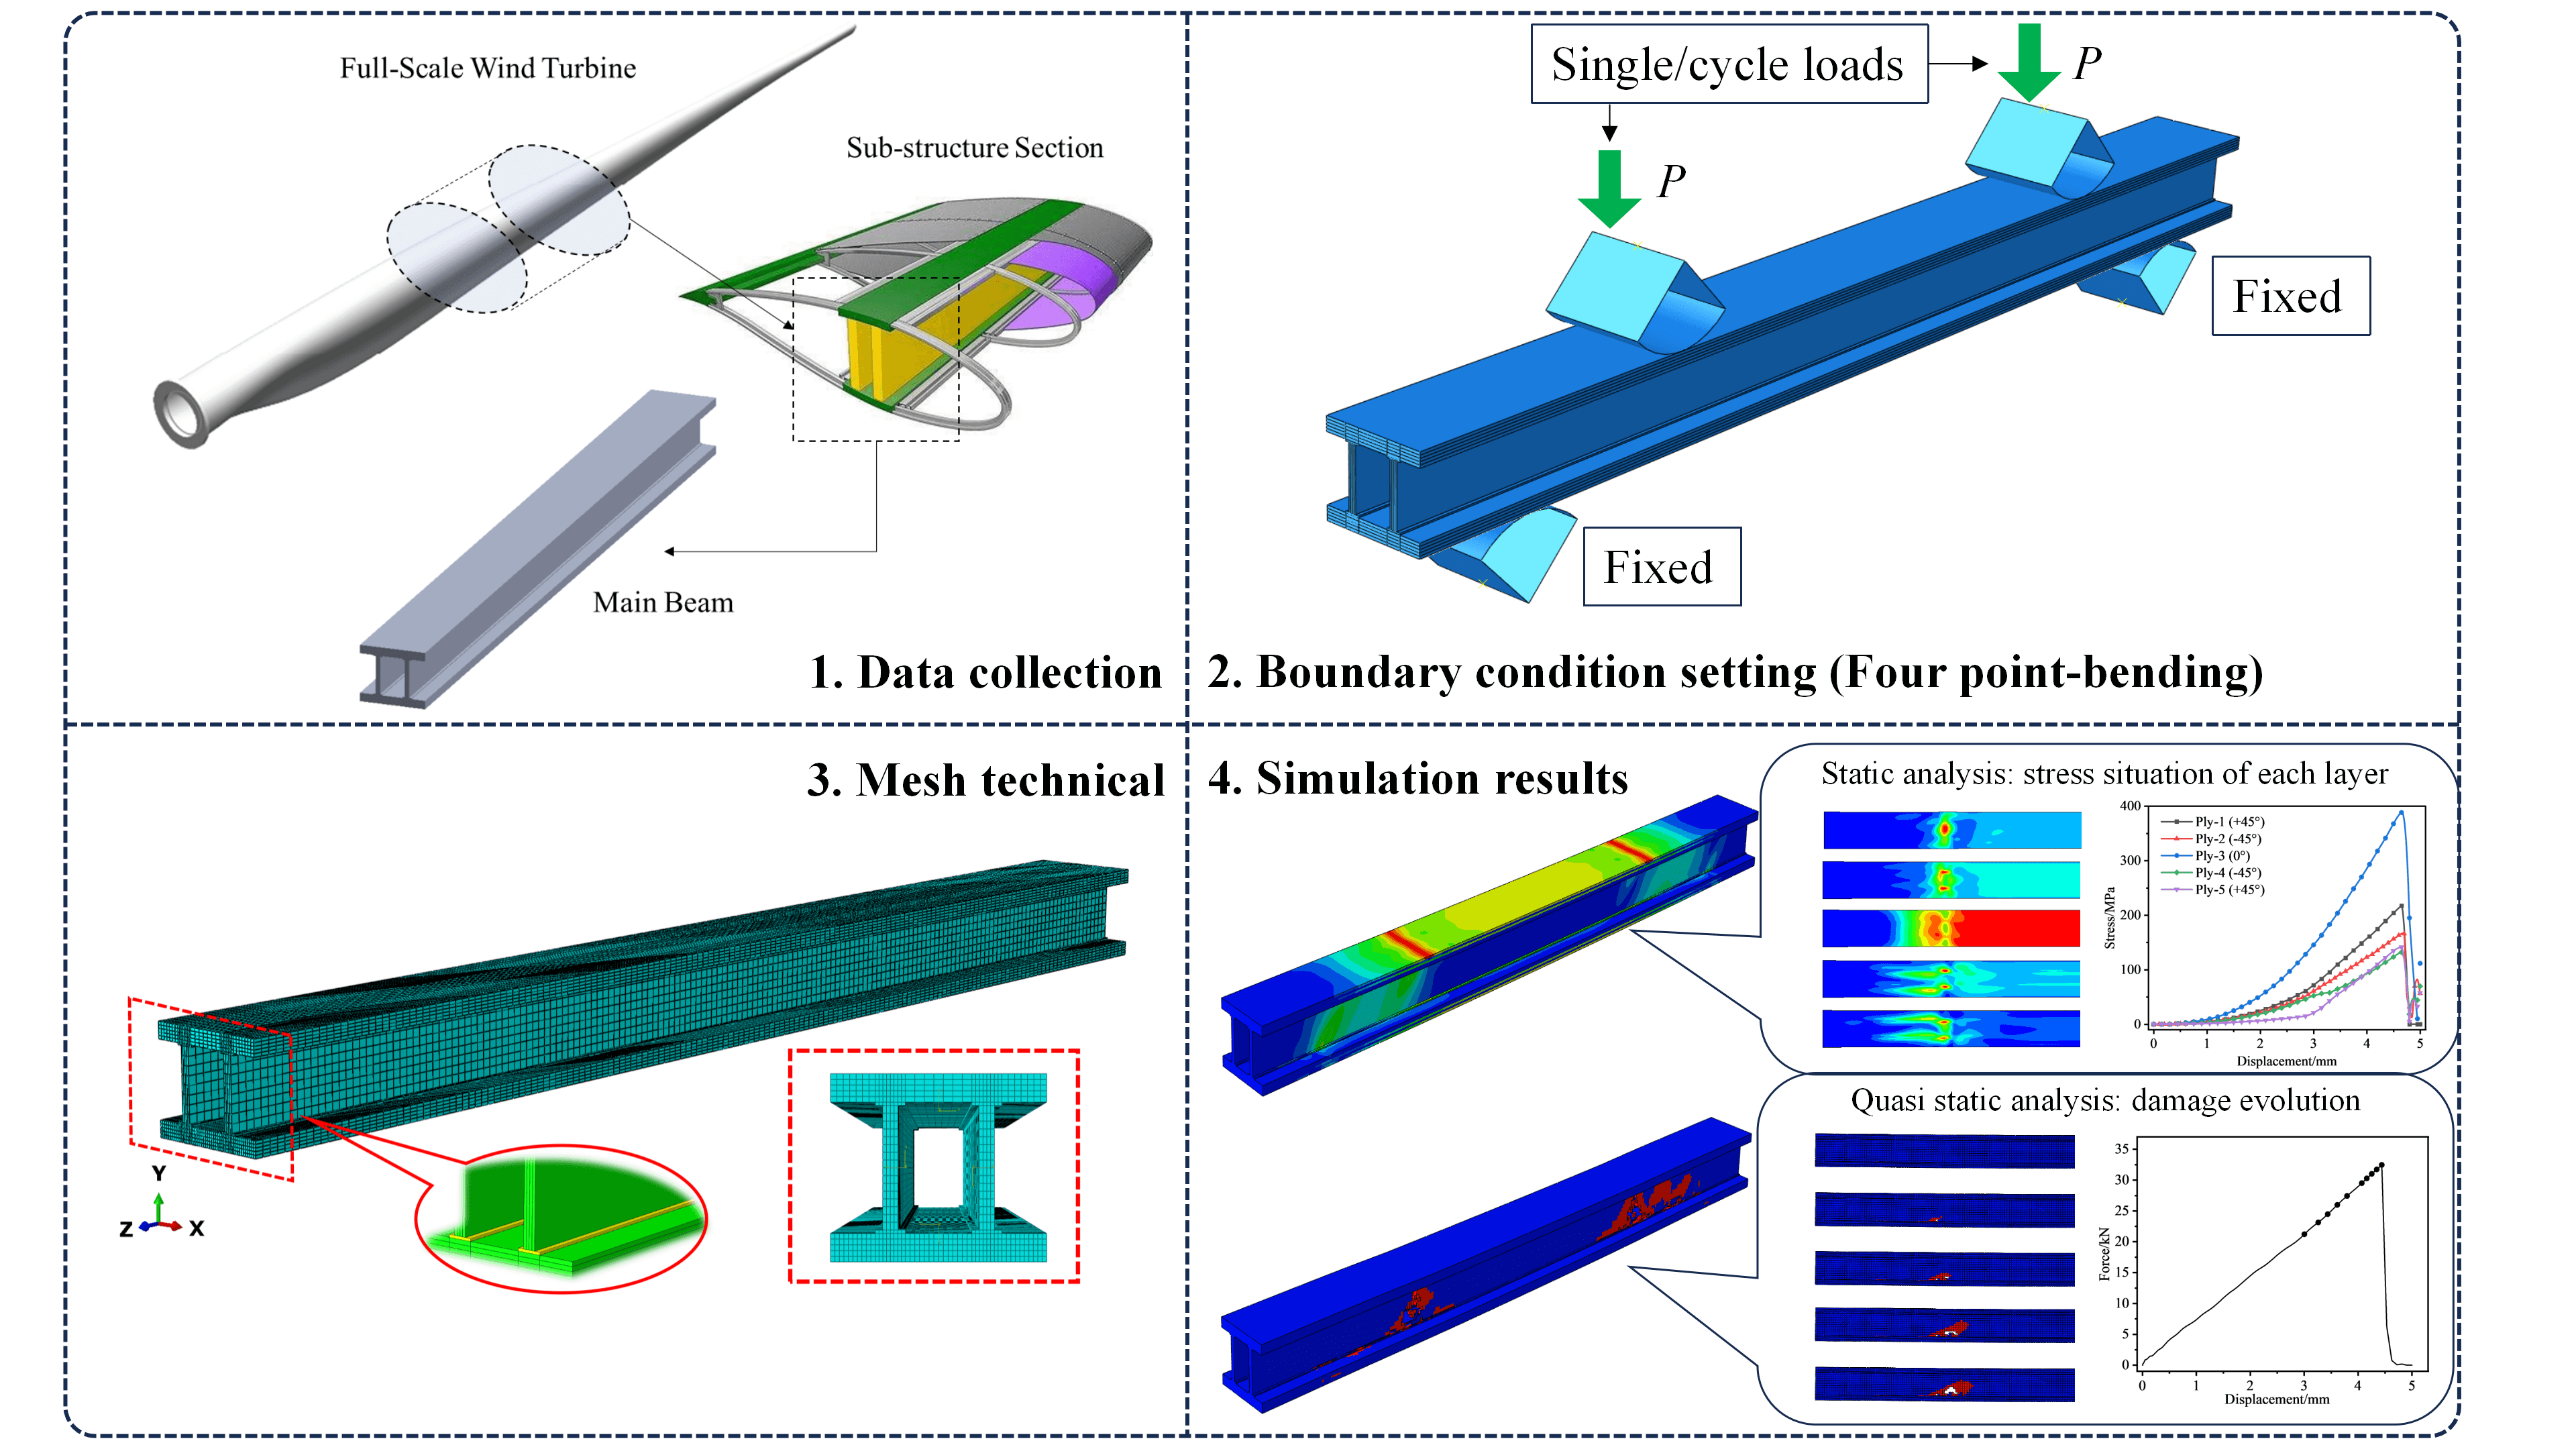 Research on Fatigue Damage Behavior of Main Beam Sub-Structure of Composite Wind Turbine Blade